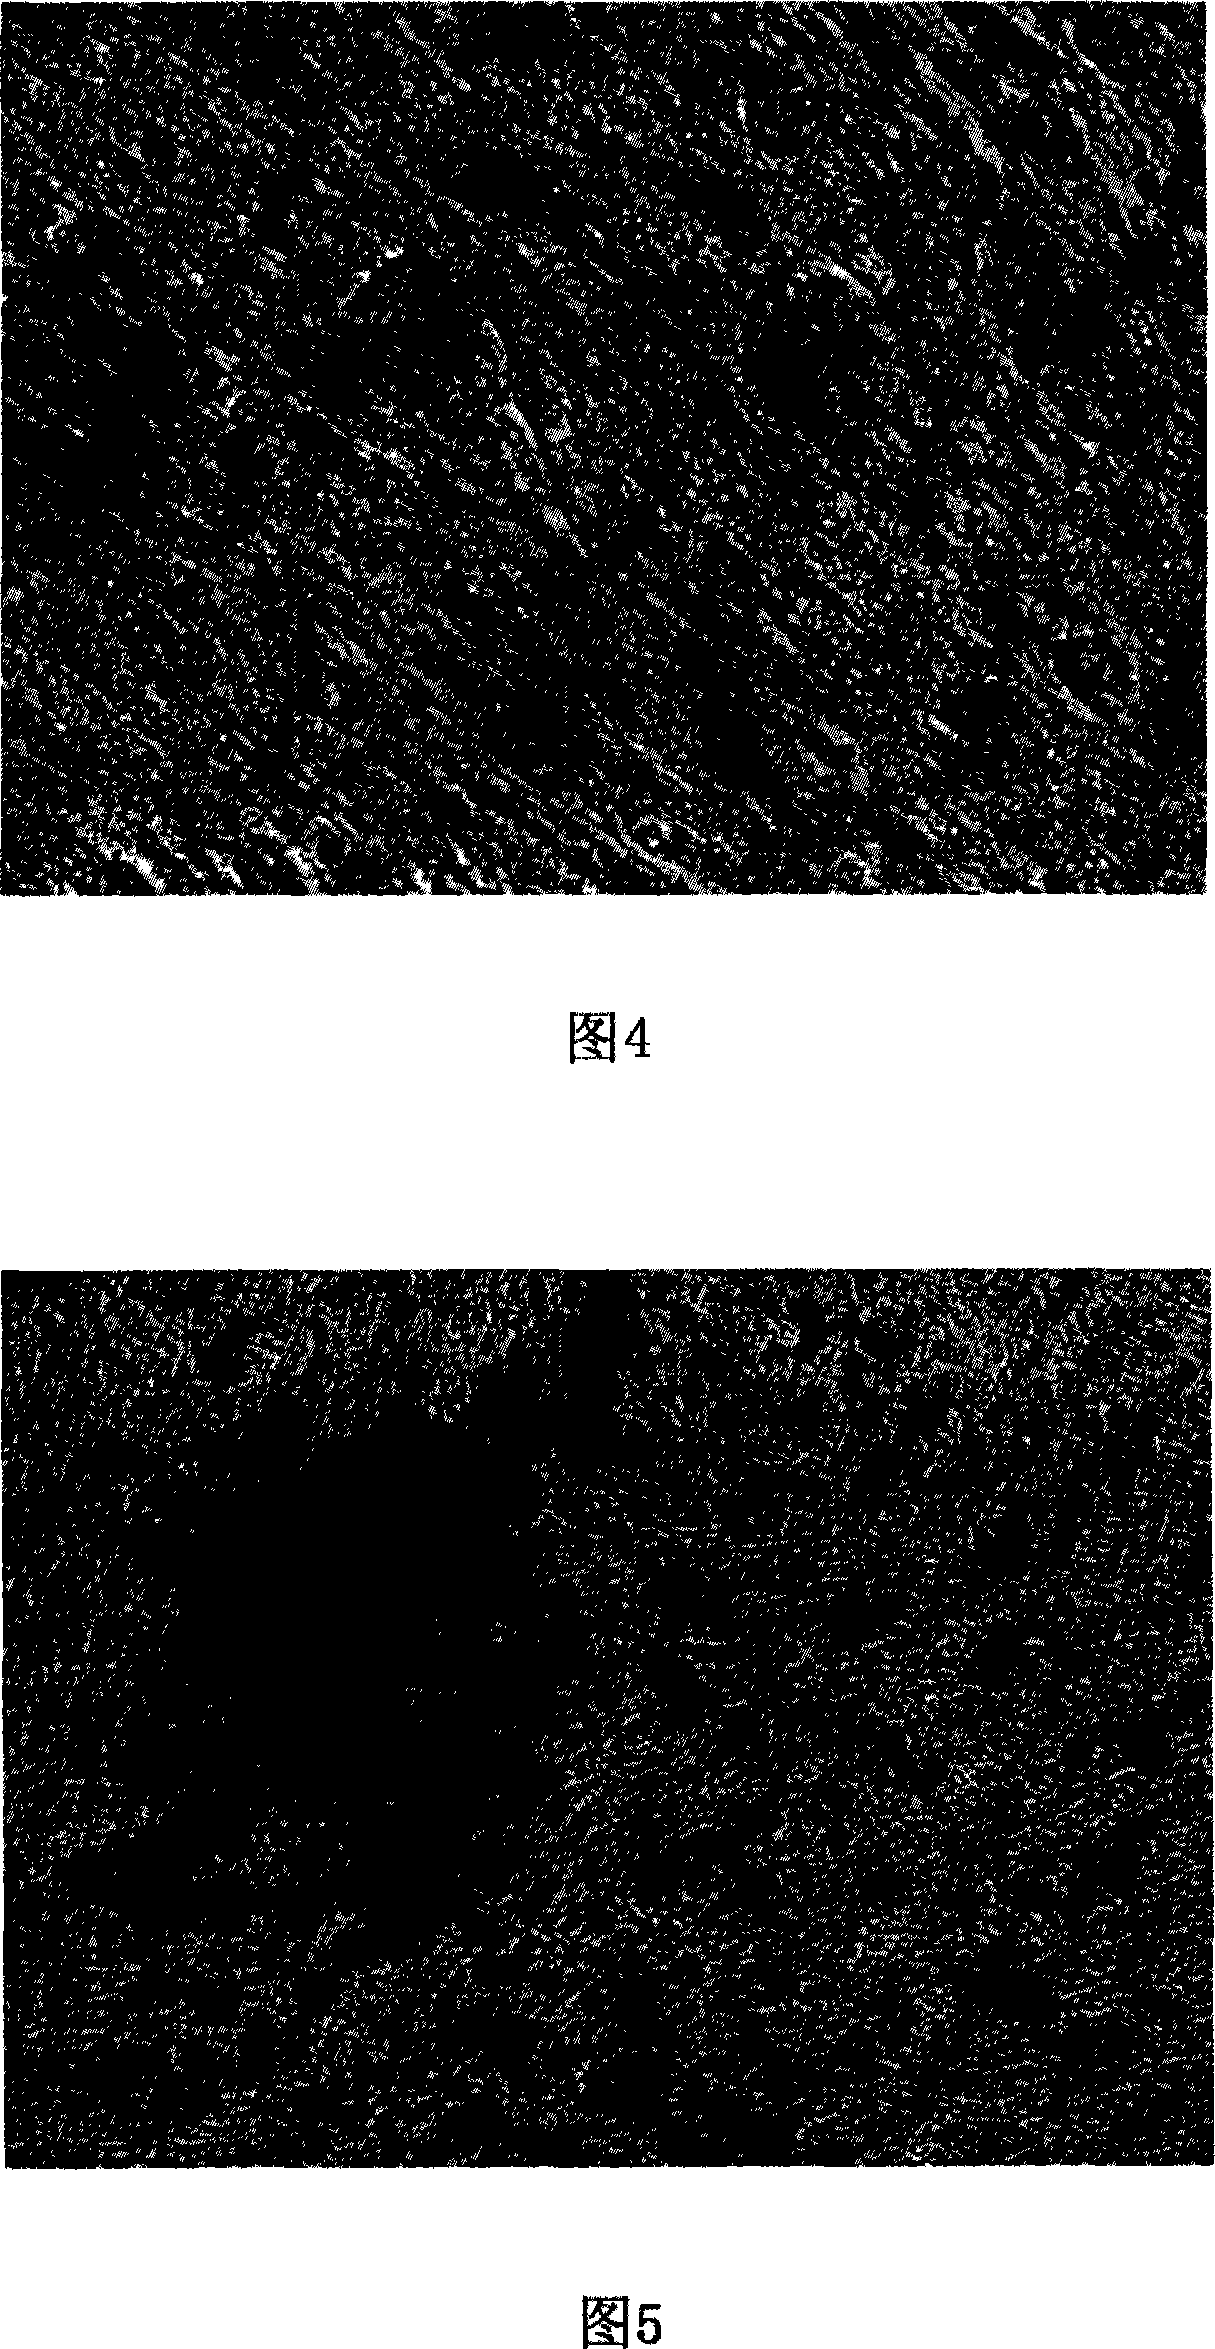 Method for culturing mesenchyme stem cell from oral cavity tissue